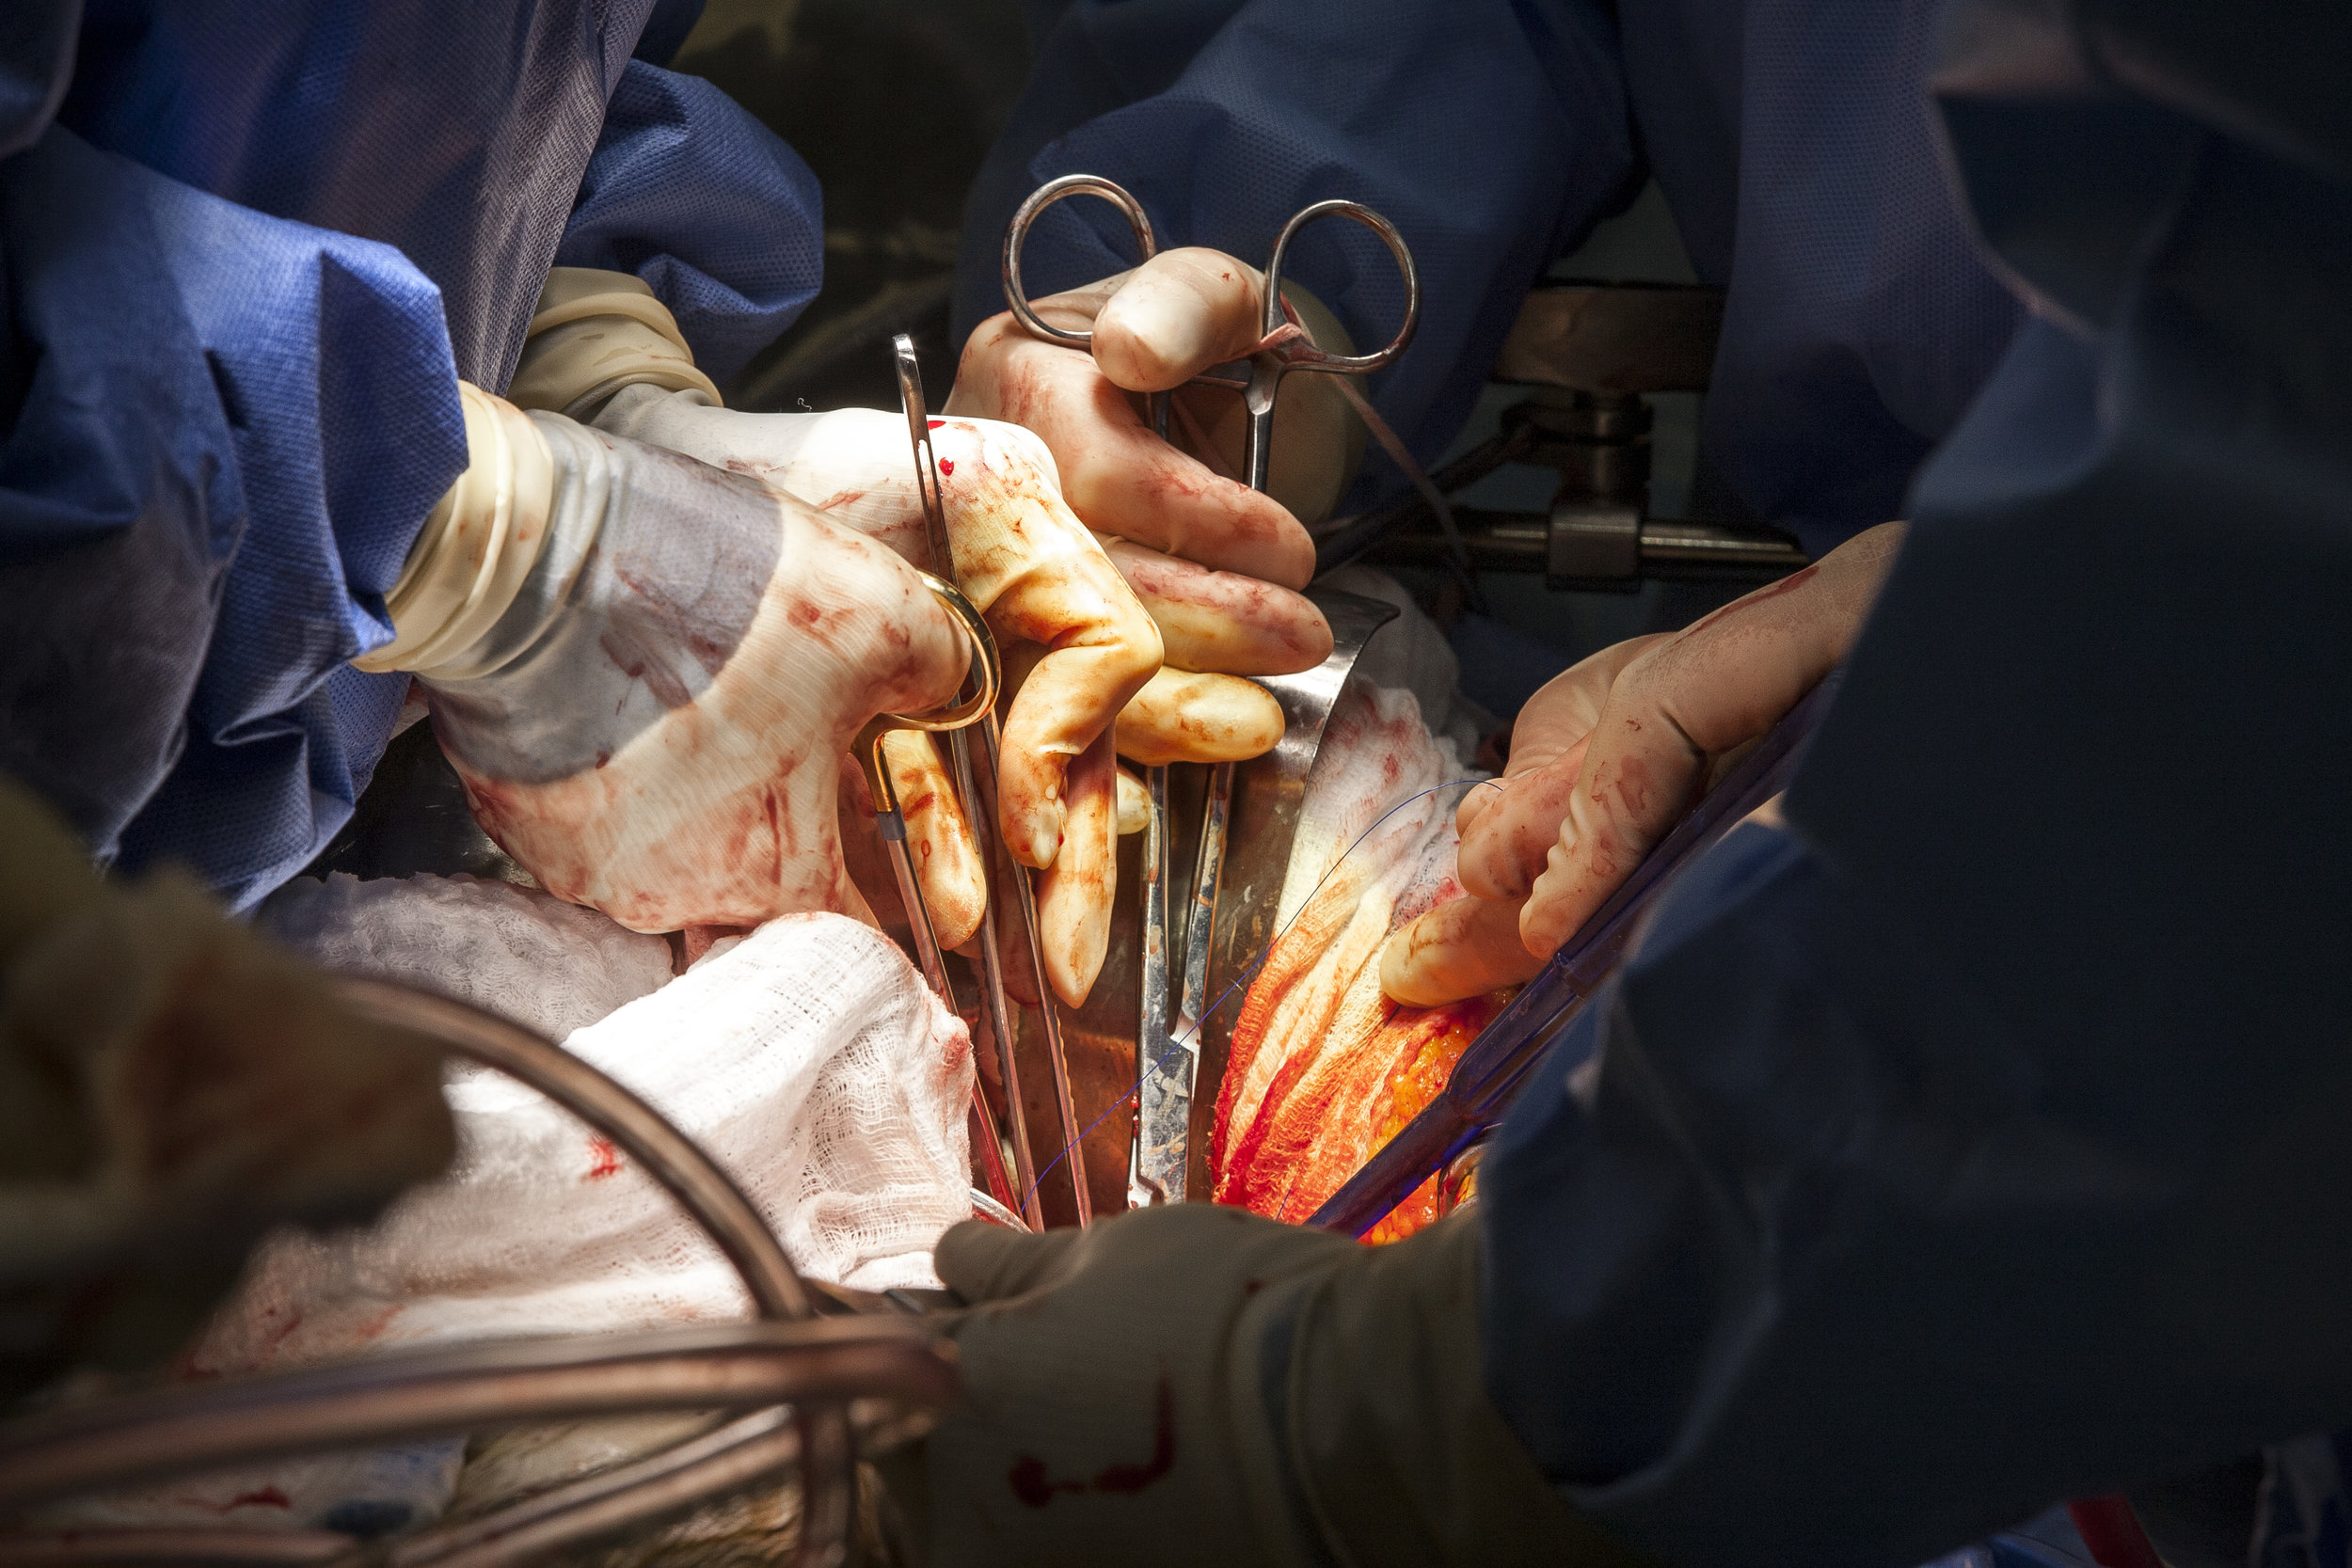  Dr. Quynh Feikes performs a surgery to fix an abdominal aneurysm at University Medical Center on Tuesday, May 23, 2017. Dr. Feikes is the only female cardiac surgeon in Nevada. Patrick Connolly Las Vegas Review-Journal @PConnPie 